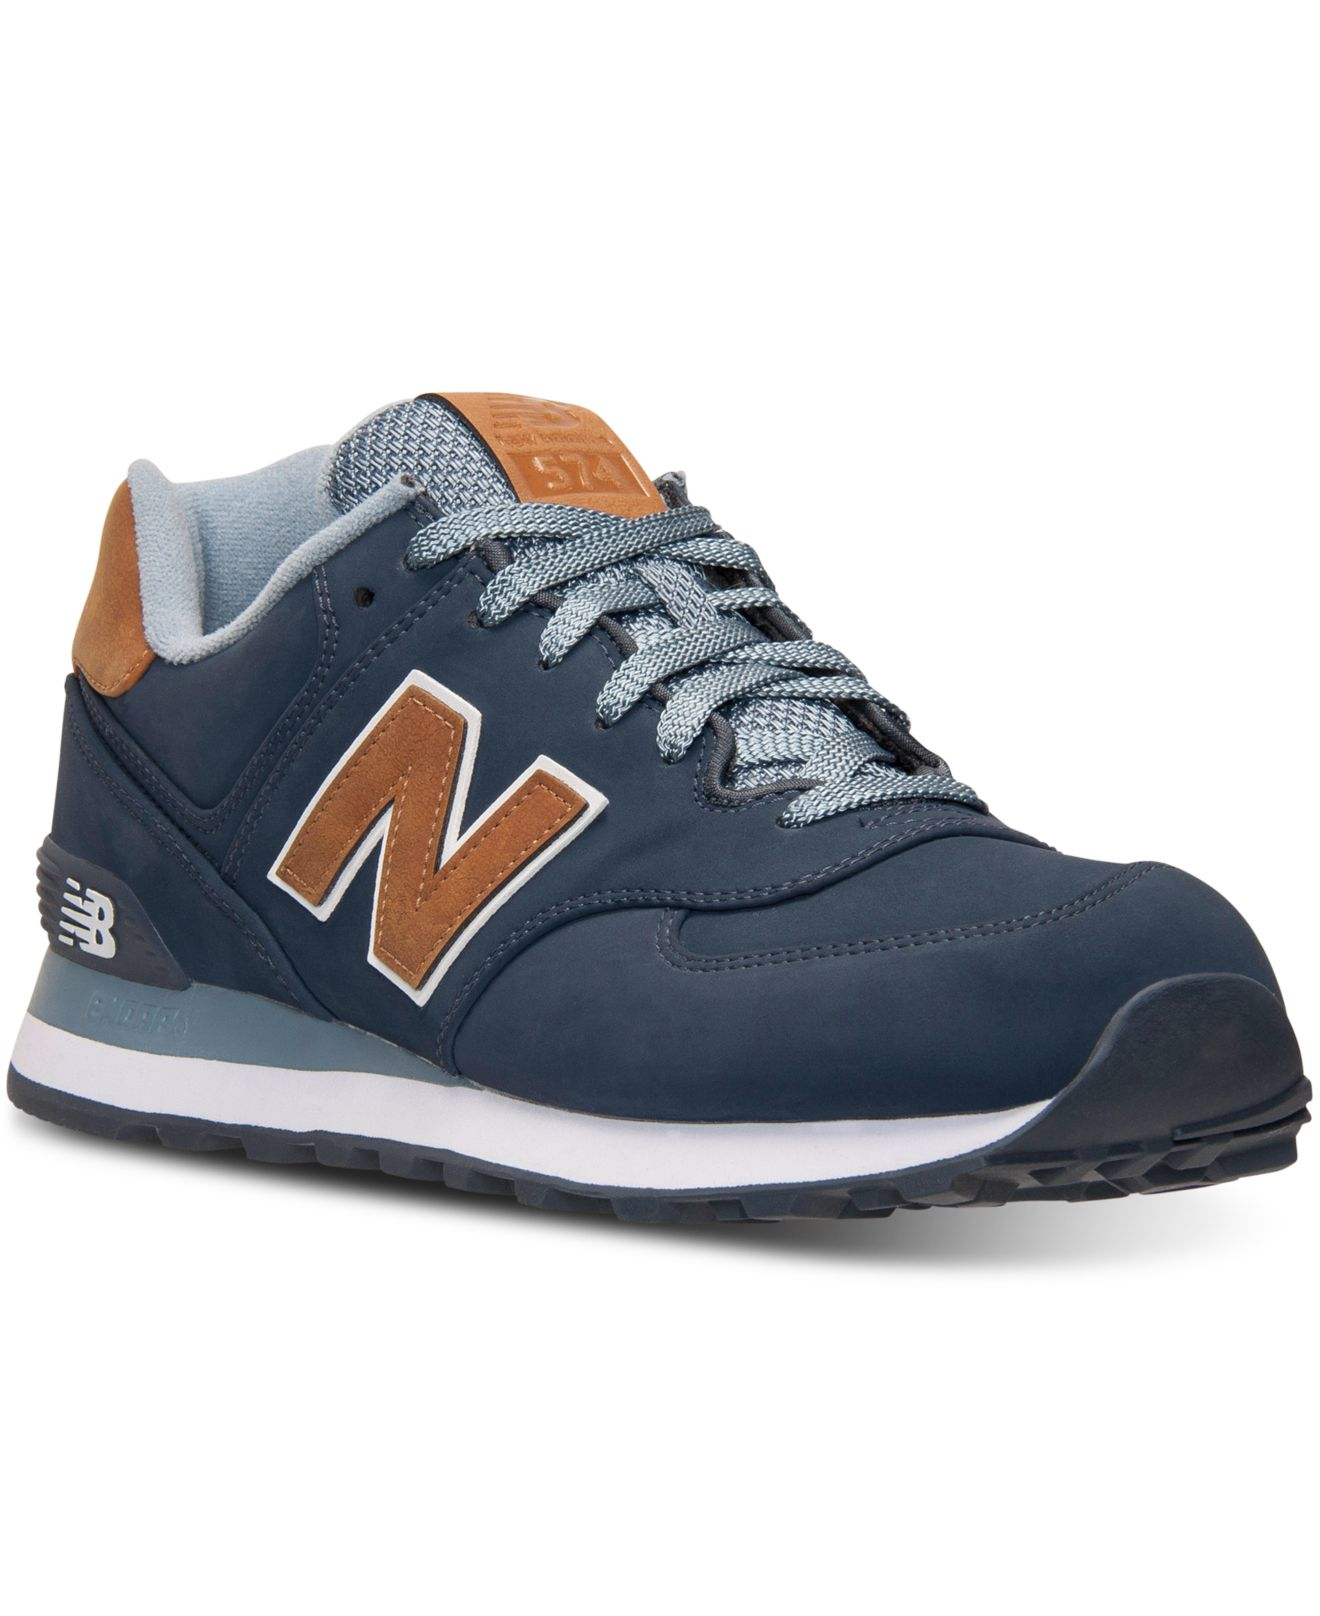 Lyst - New Balance Men's 574 Casual Sneakers From Finish Line in Gray